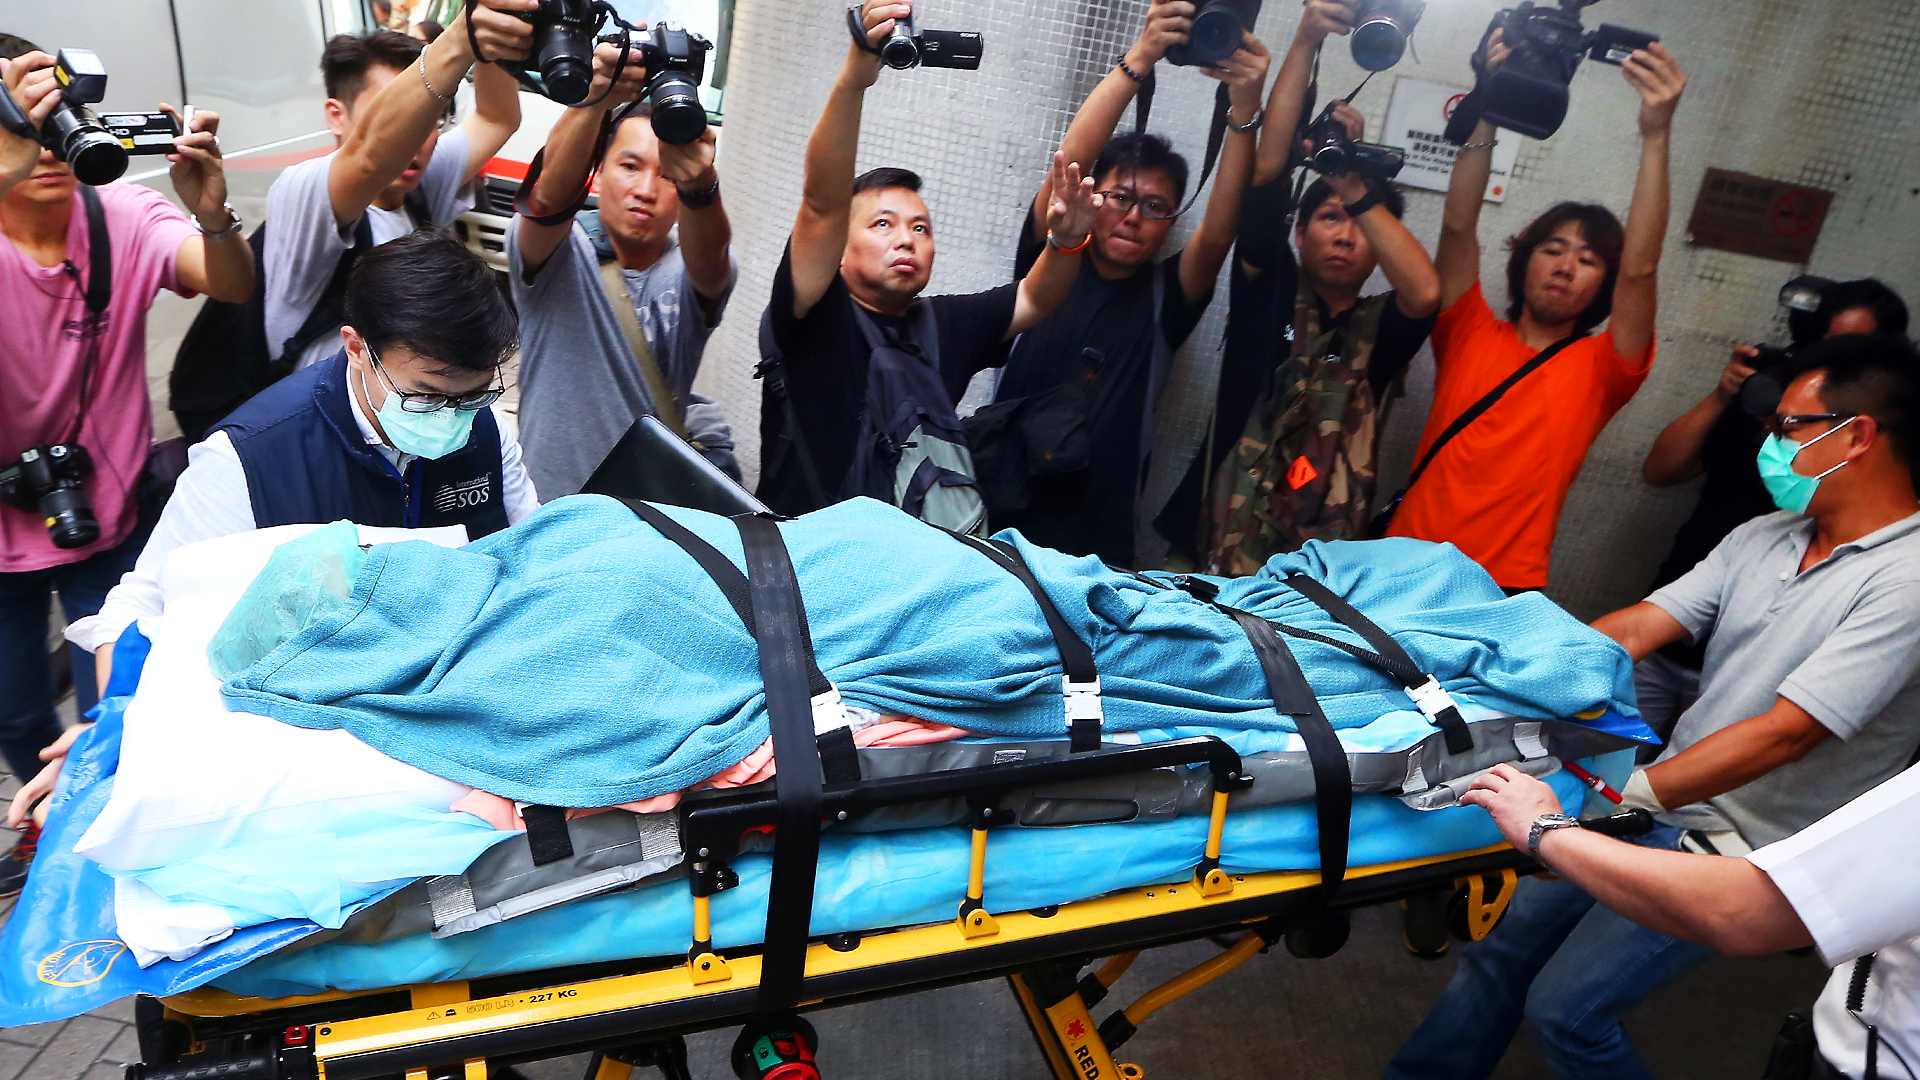 A woman who suffered burns in a dust explosion in Taiwan arrives at Queen Mary Hospital. Photo: Sam Tsang